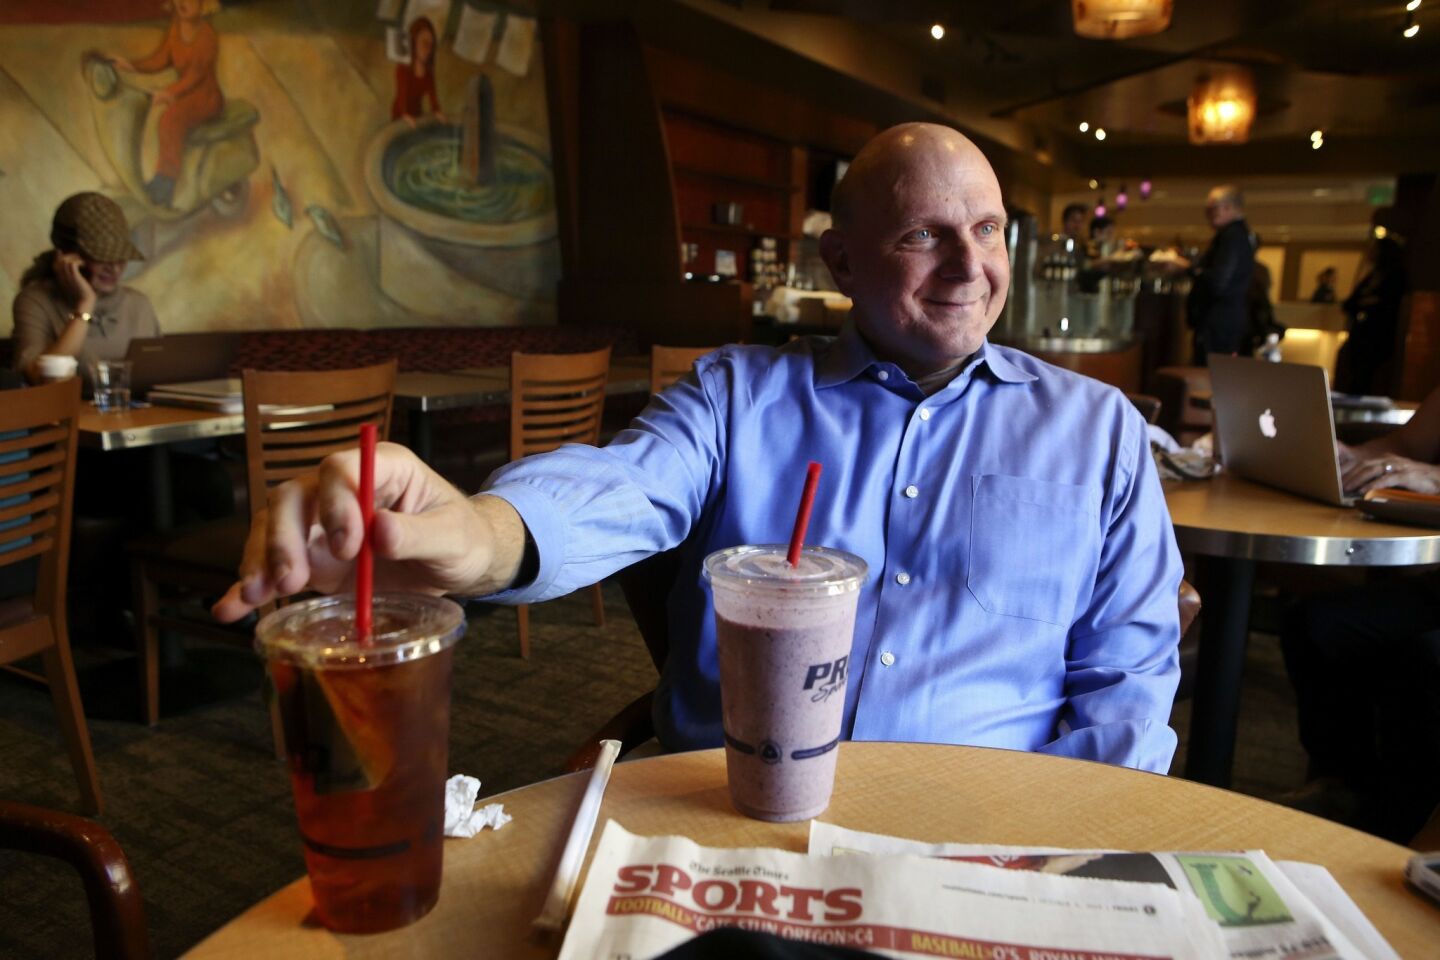 Clippers owner Steve Ballmer relaxes in the cafe at Pro Sports Club in Bellevue, Wash., after a workout.